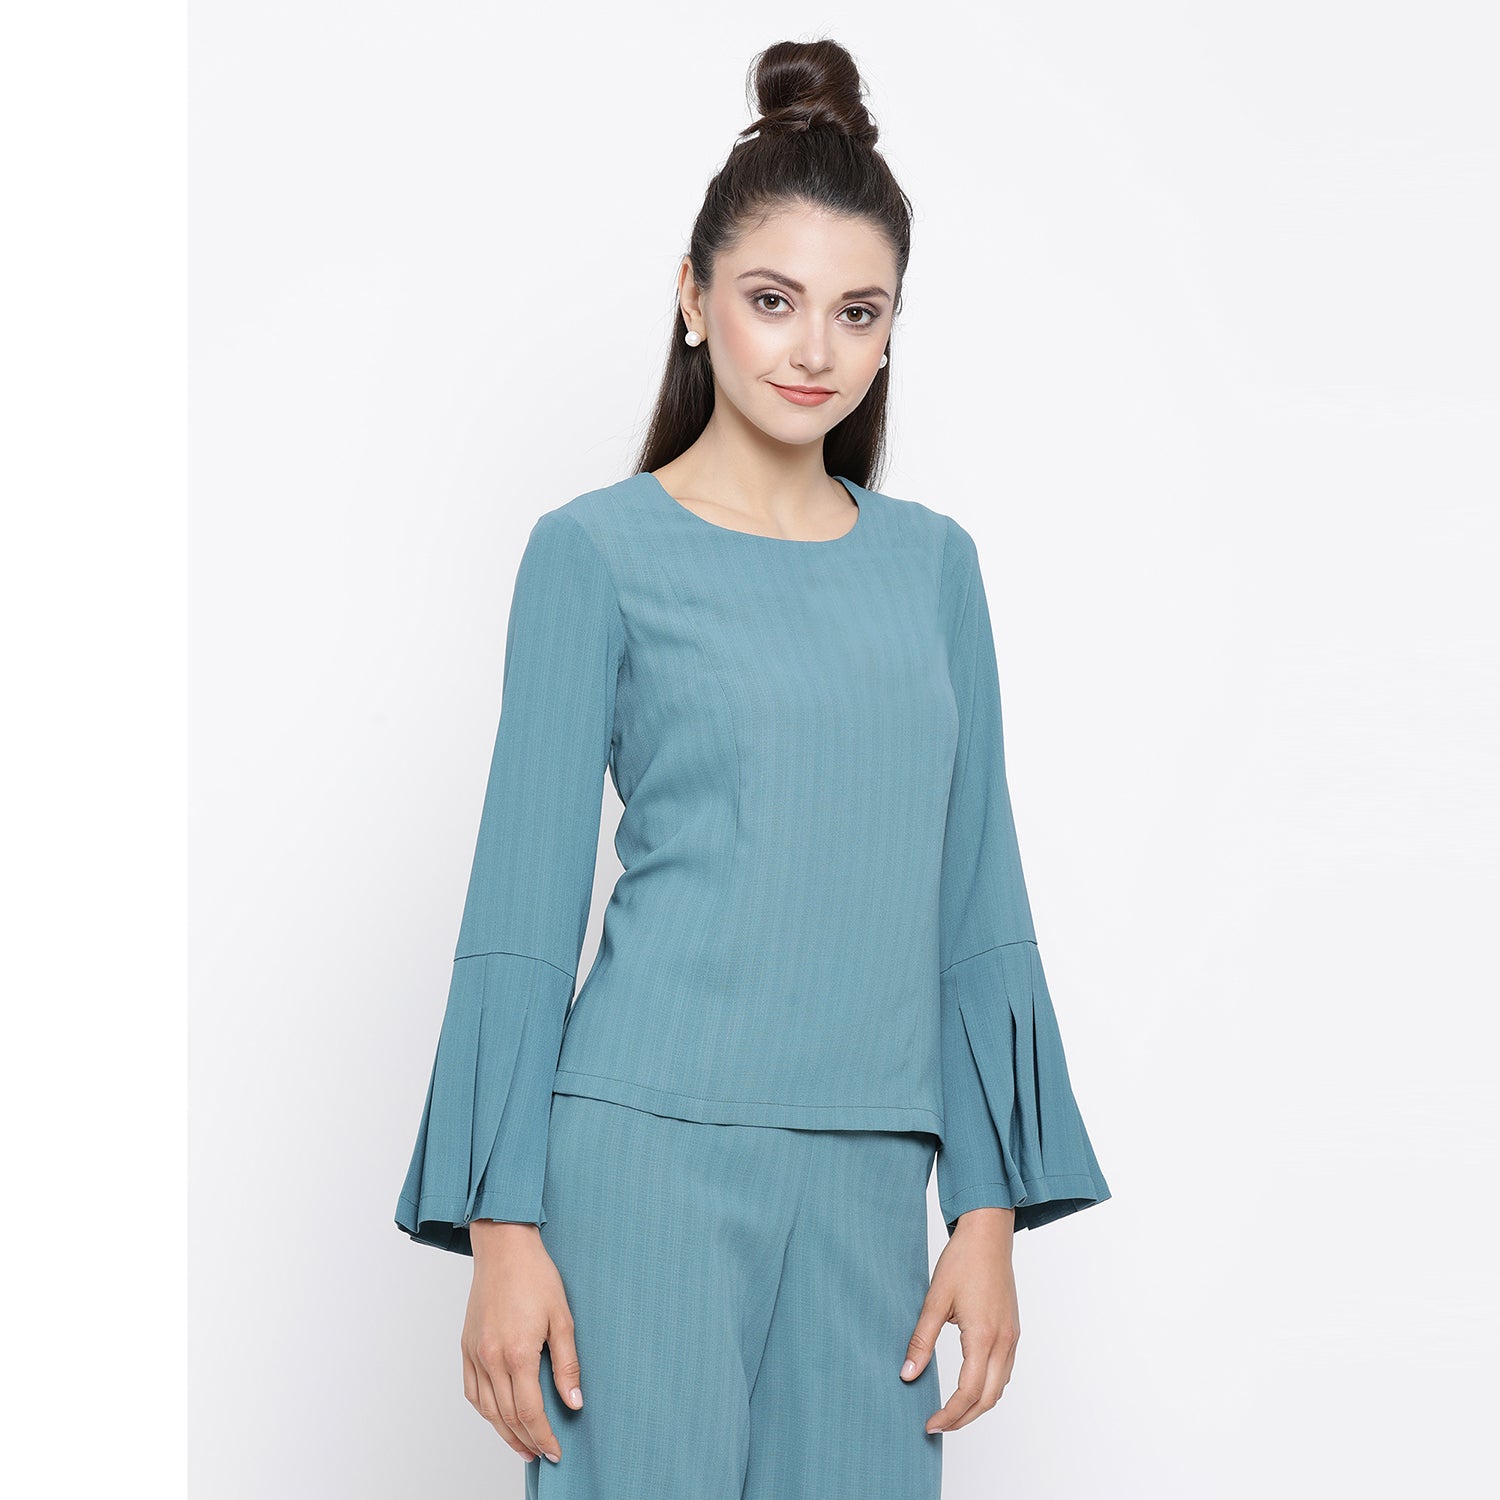 Teal Top With Pleated Cuff By Office & You